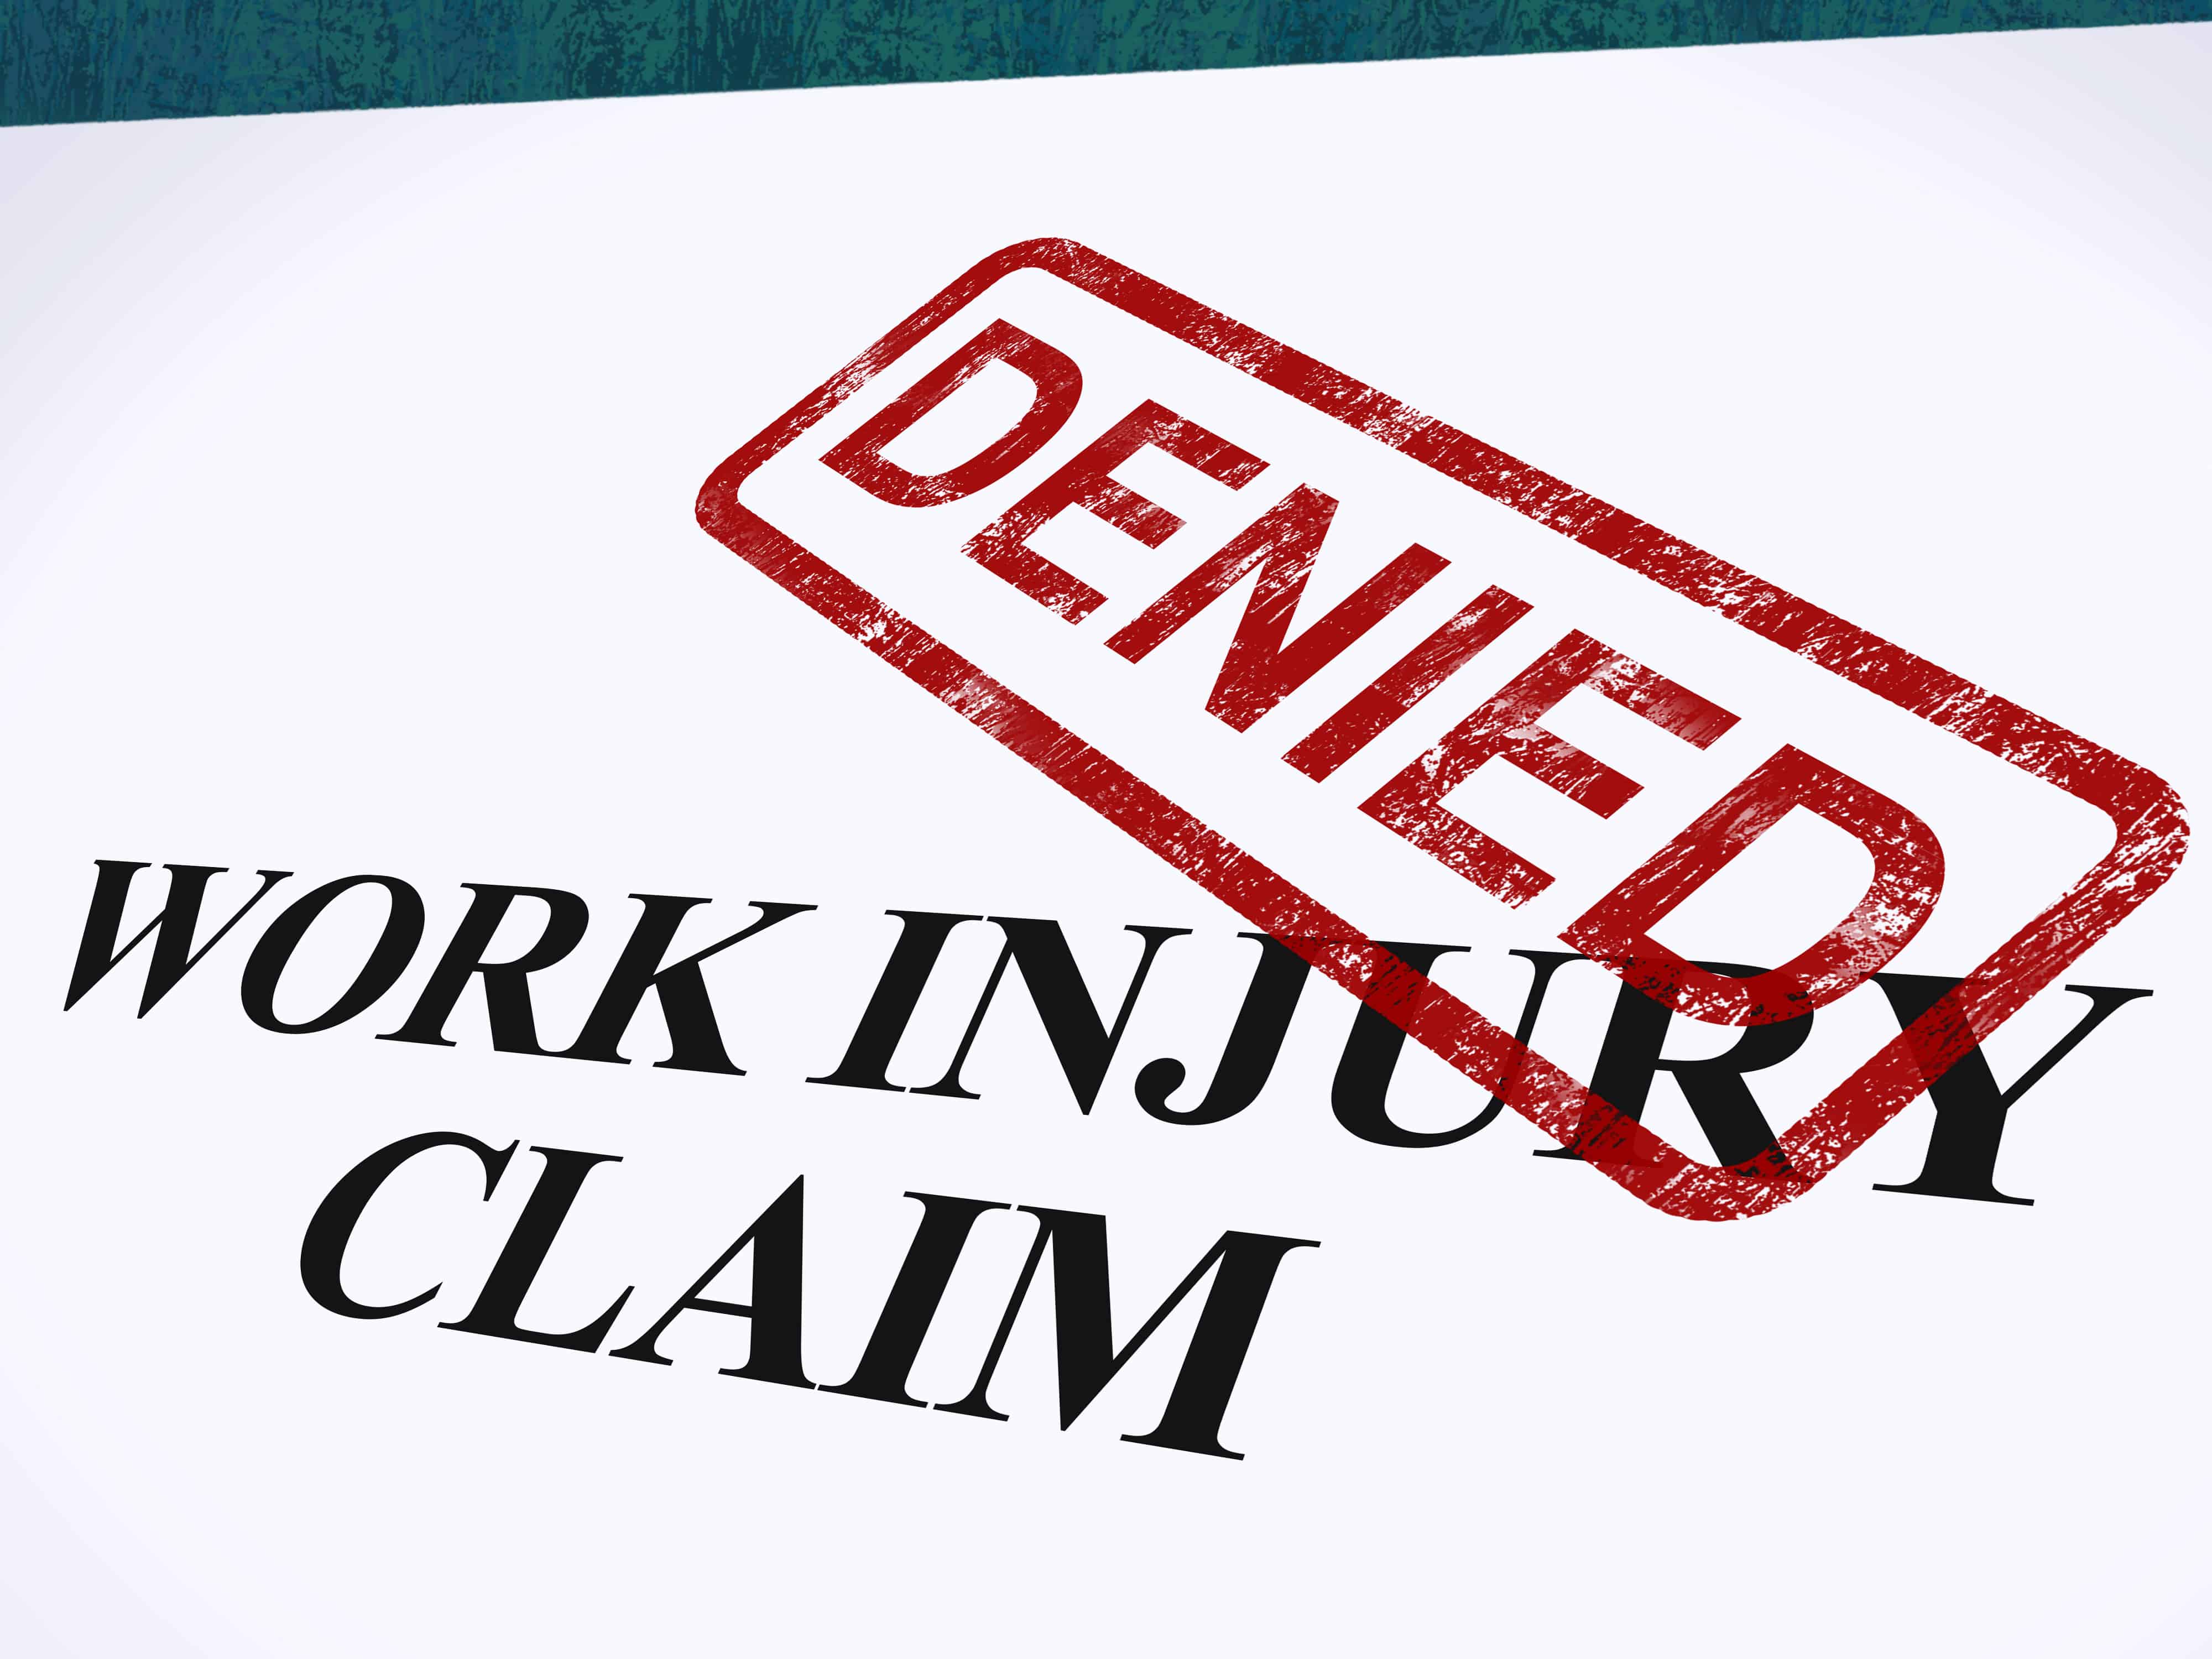 Contact a West Chester Workers’ Compensation Lawyer at Wusinich, Sweeney & Ryan, LLC if Your Claim Was Denied